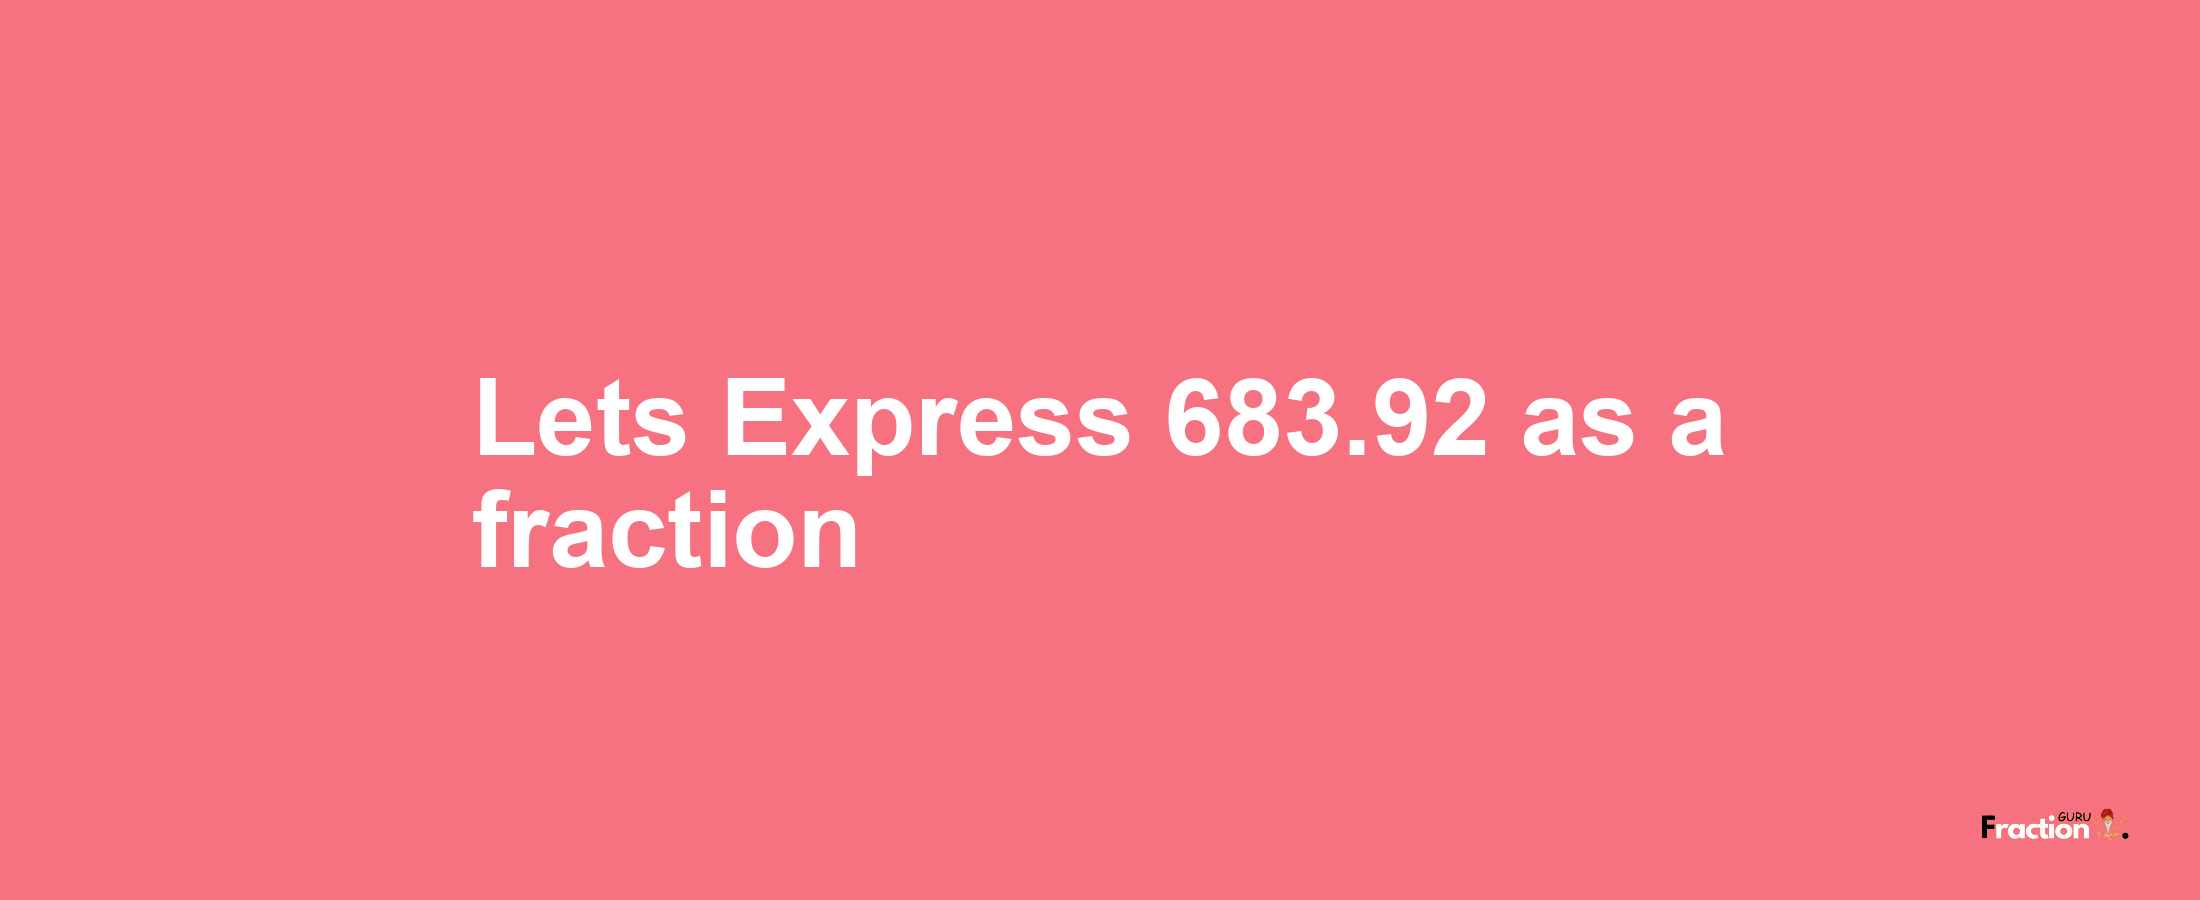 Lets Express 683.92 as afraction